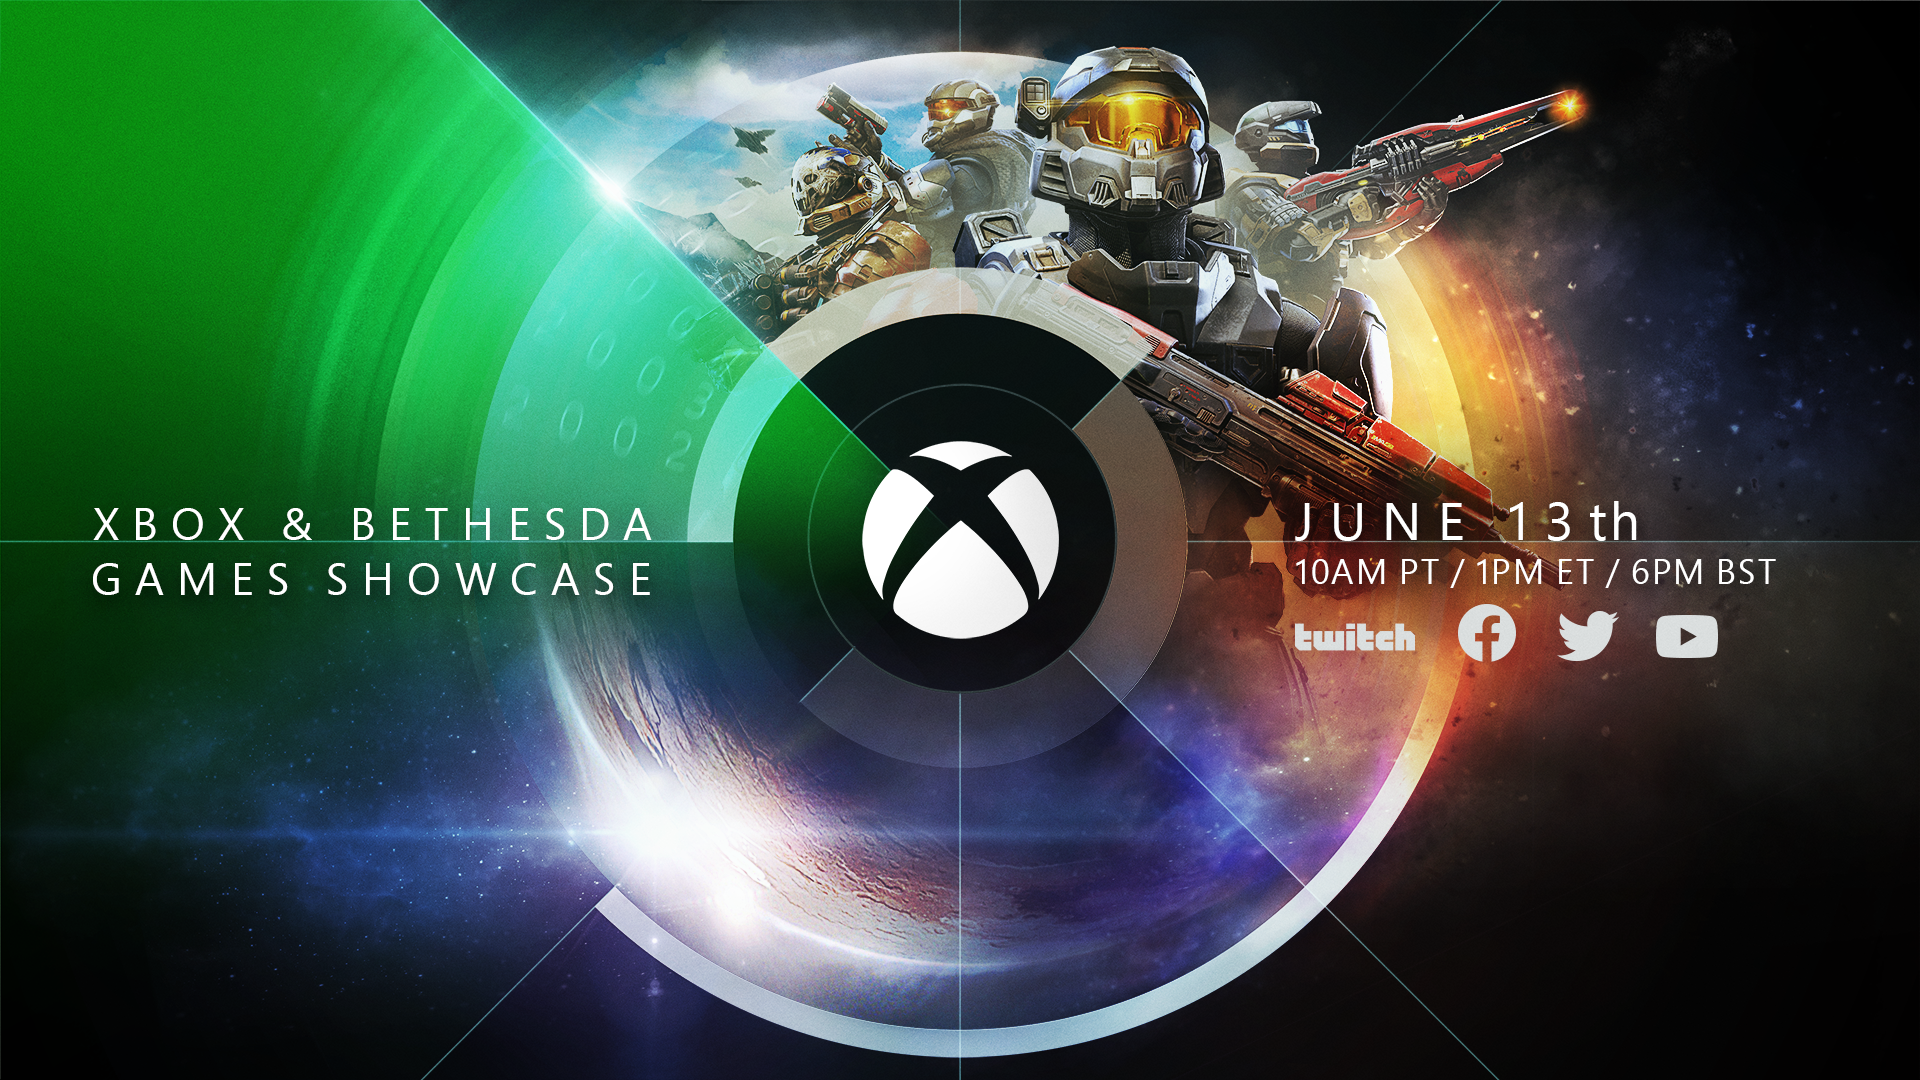 The photo mentioned 003, JUNE 13th, 10AM PT / 1PM ET / 6PM BST, related to Xbox, including Xbox e3 2021, E3 2021, E3, Xbox One, Bethesda software